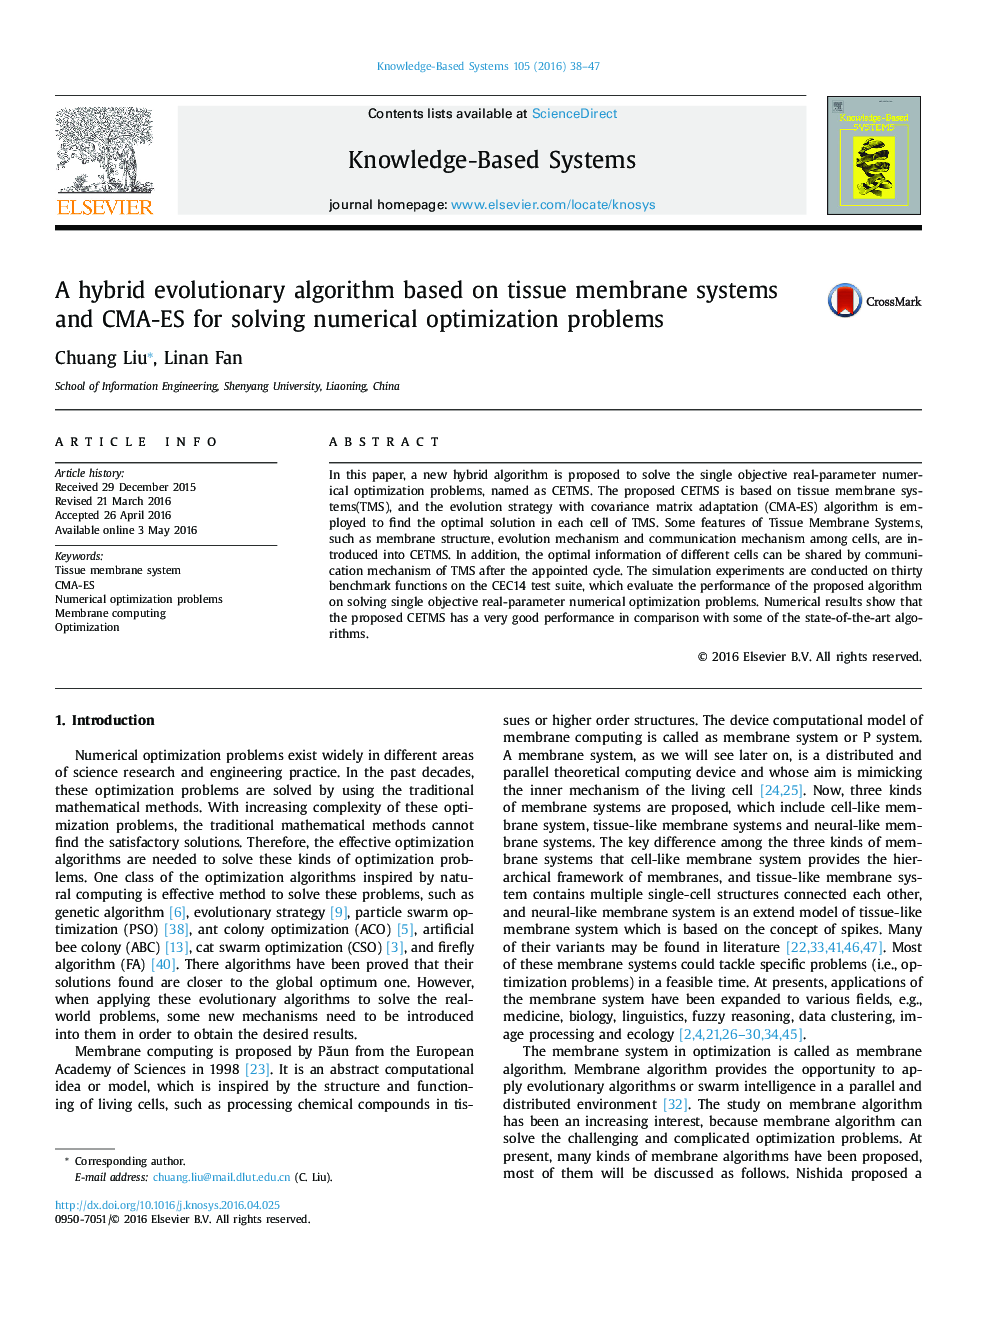 A hybrid evolutionary algorithm based on tissue membrane systems and CMA-ES for solving numerical optimization problems